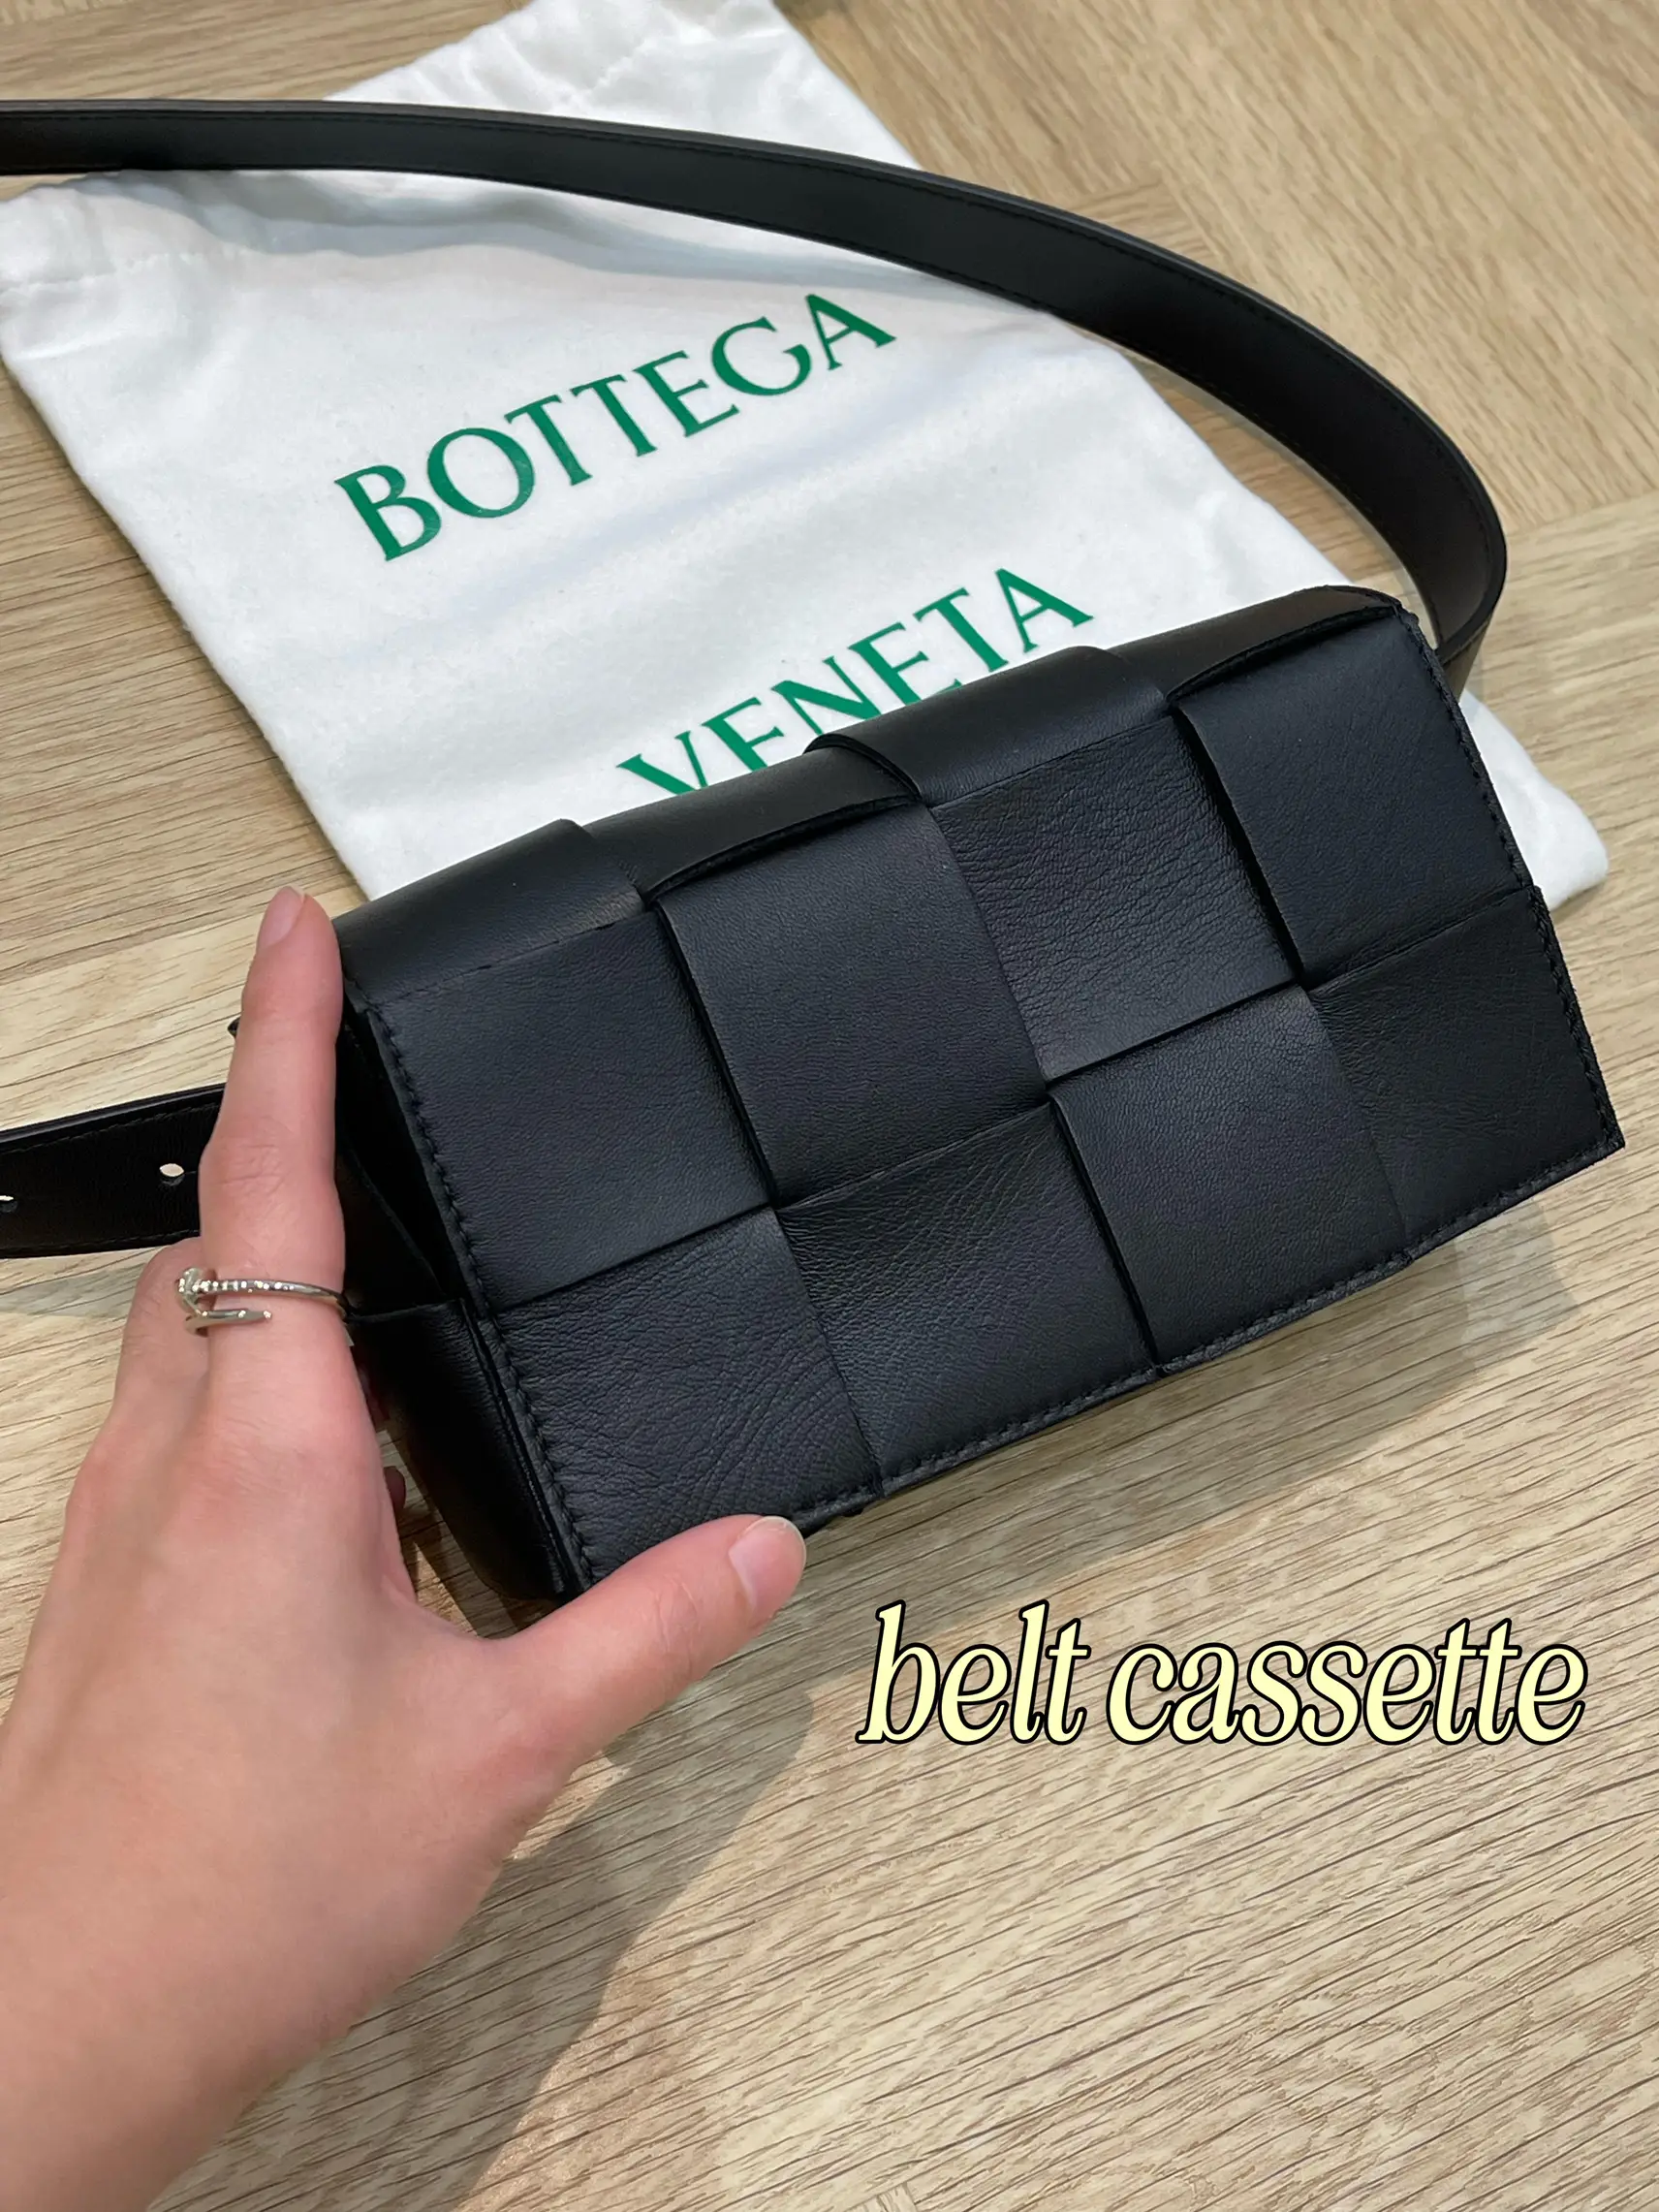 Trying on Bottega Veneta's newest bag: The Andiamo, Gallery posted by  michelleorgeta